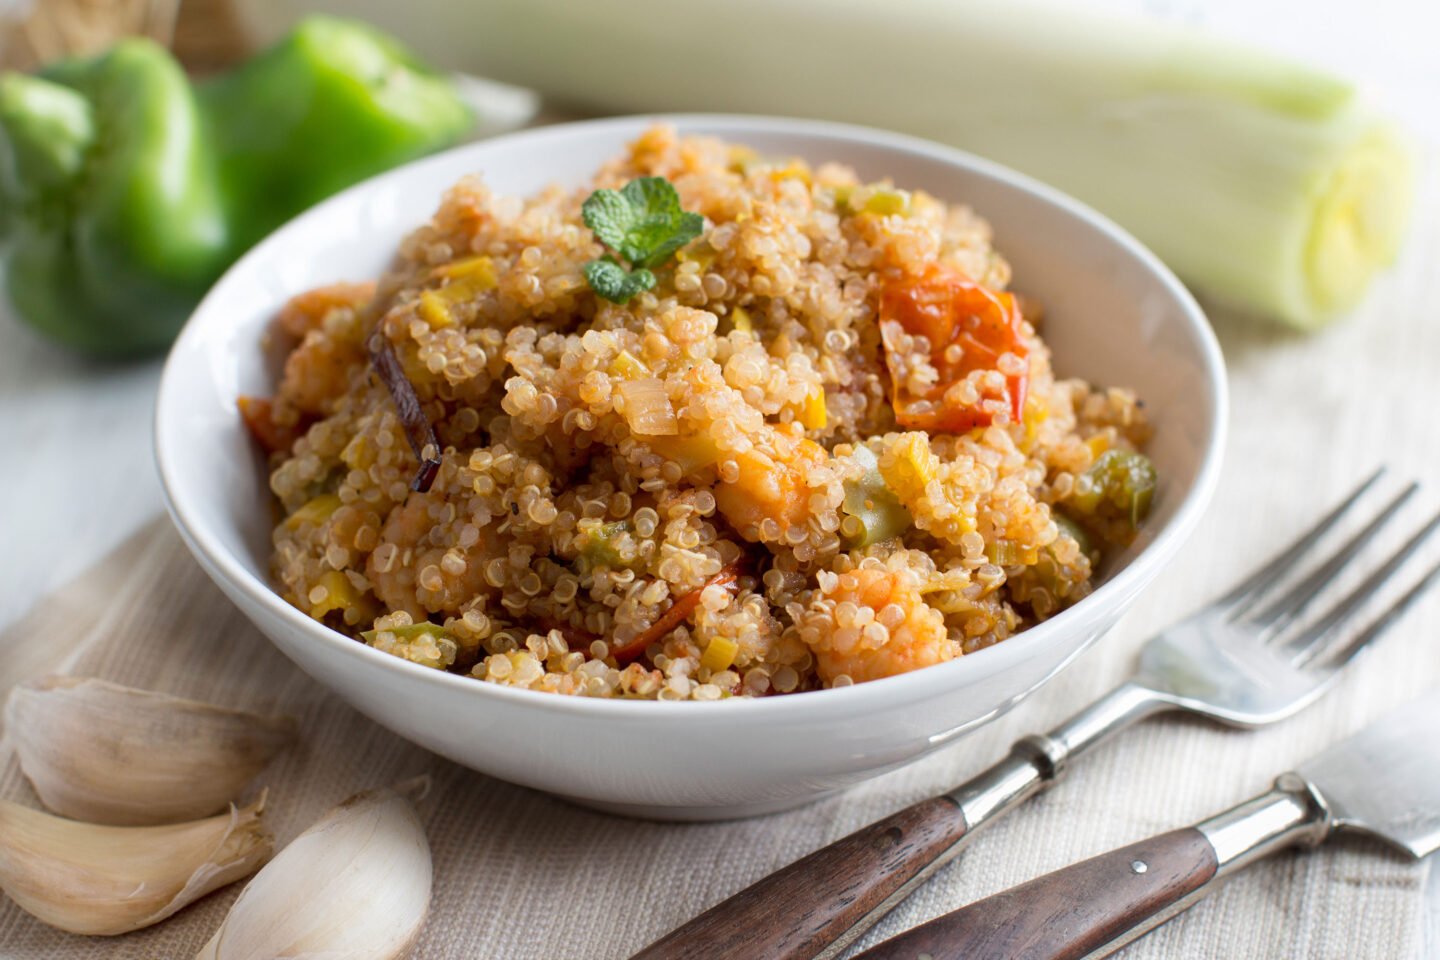 cooked quinoa with vegetables and shrimps